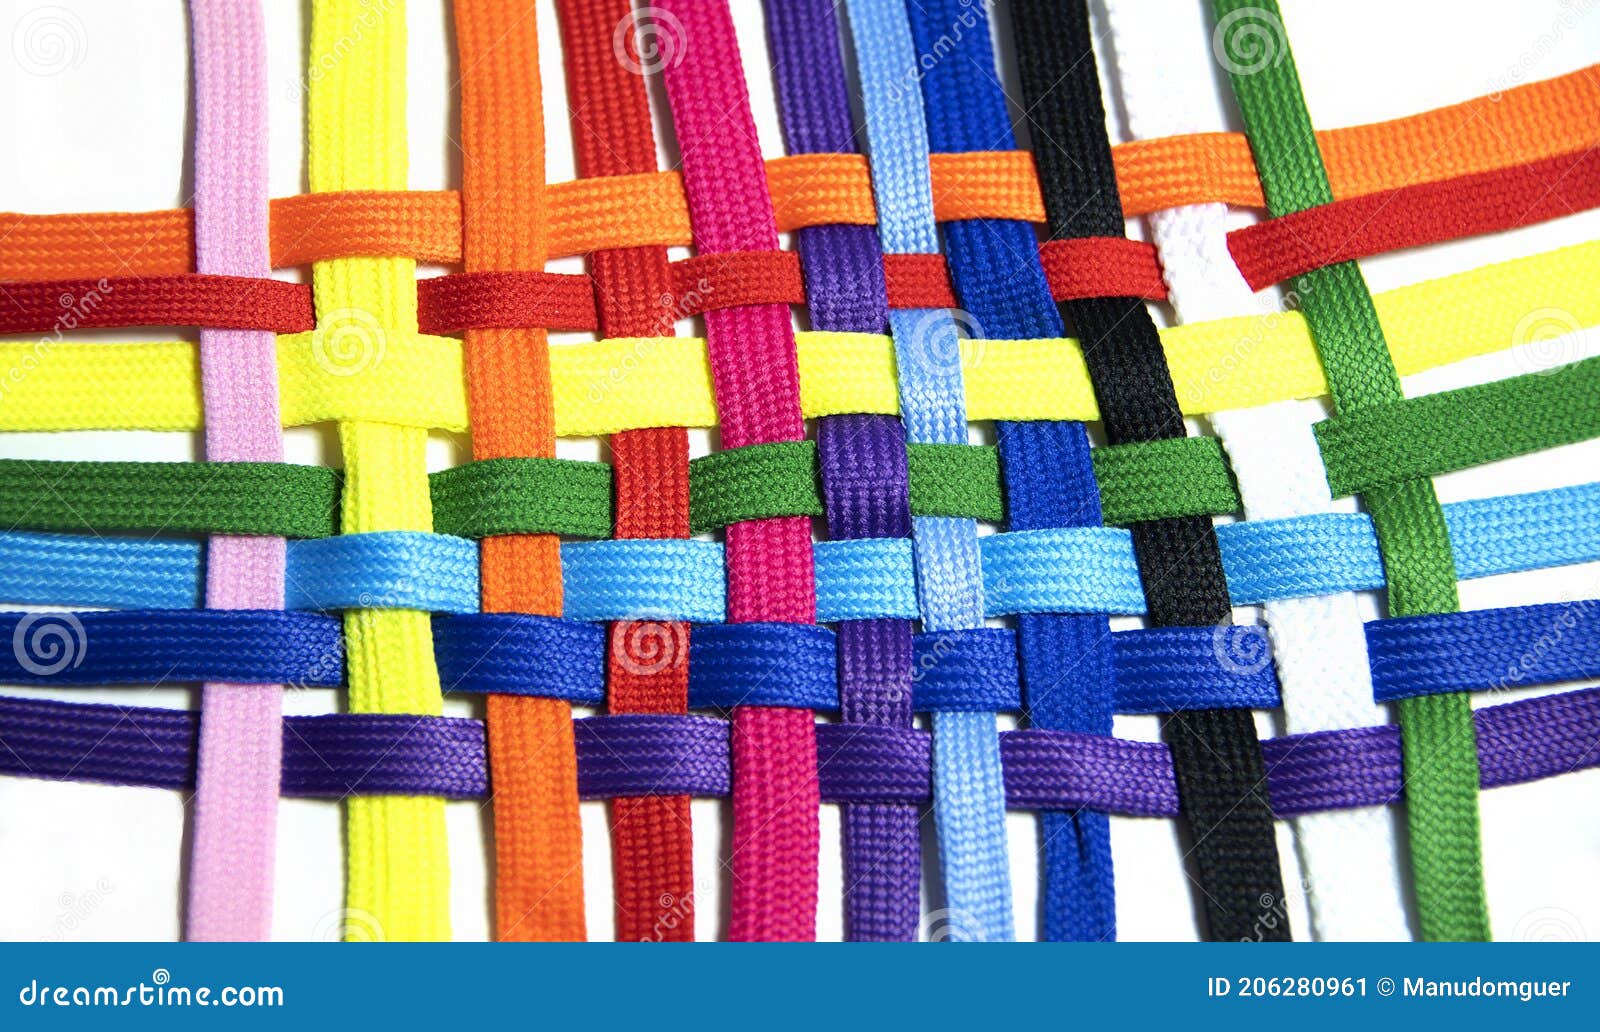 panorama, colorful ropes are connected, cooperation and cohesion